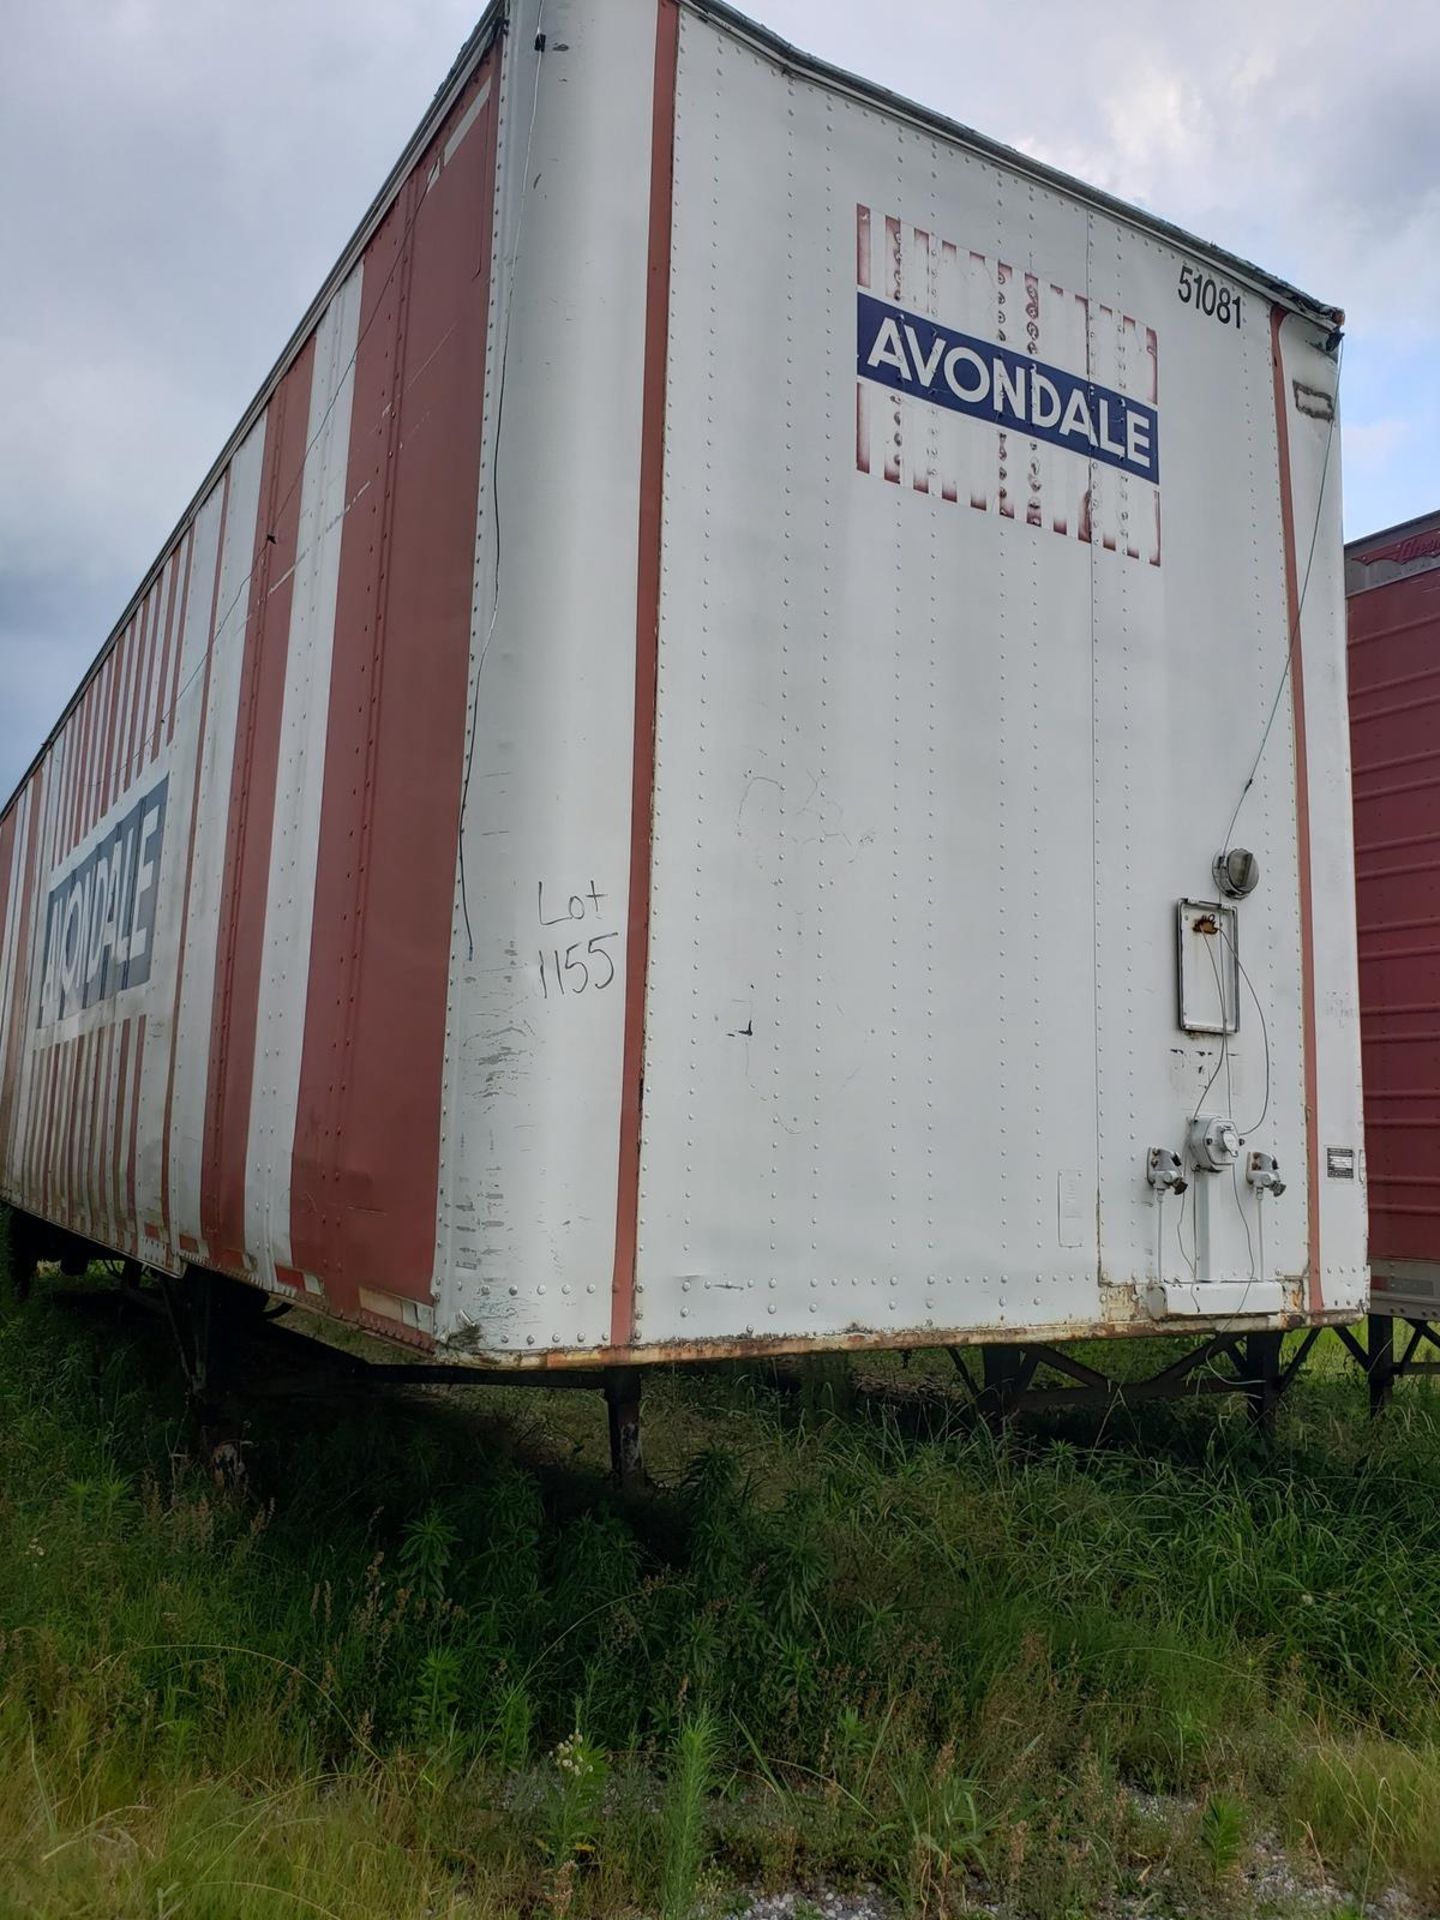 Dry Van Storage Trailer, Trailer # 51081. (No Title) Rig Fee: $Buyer To Remove